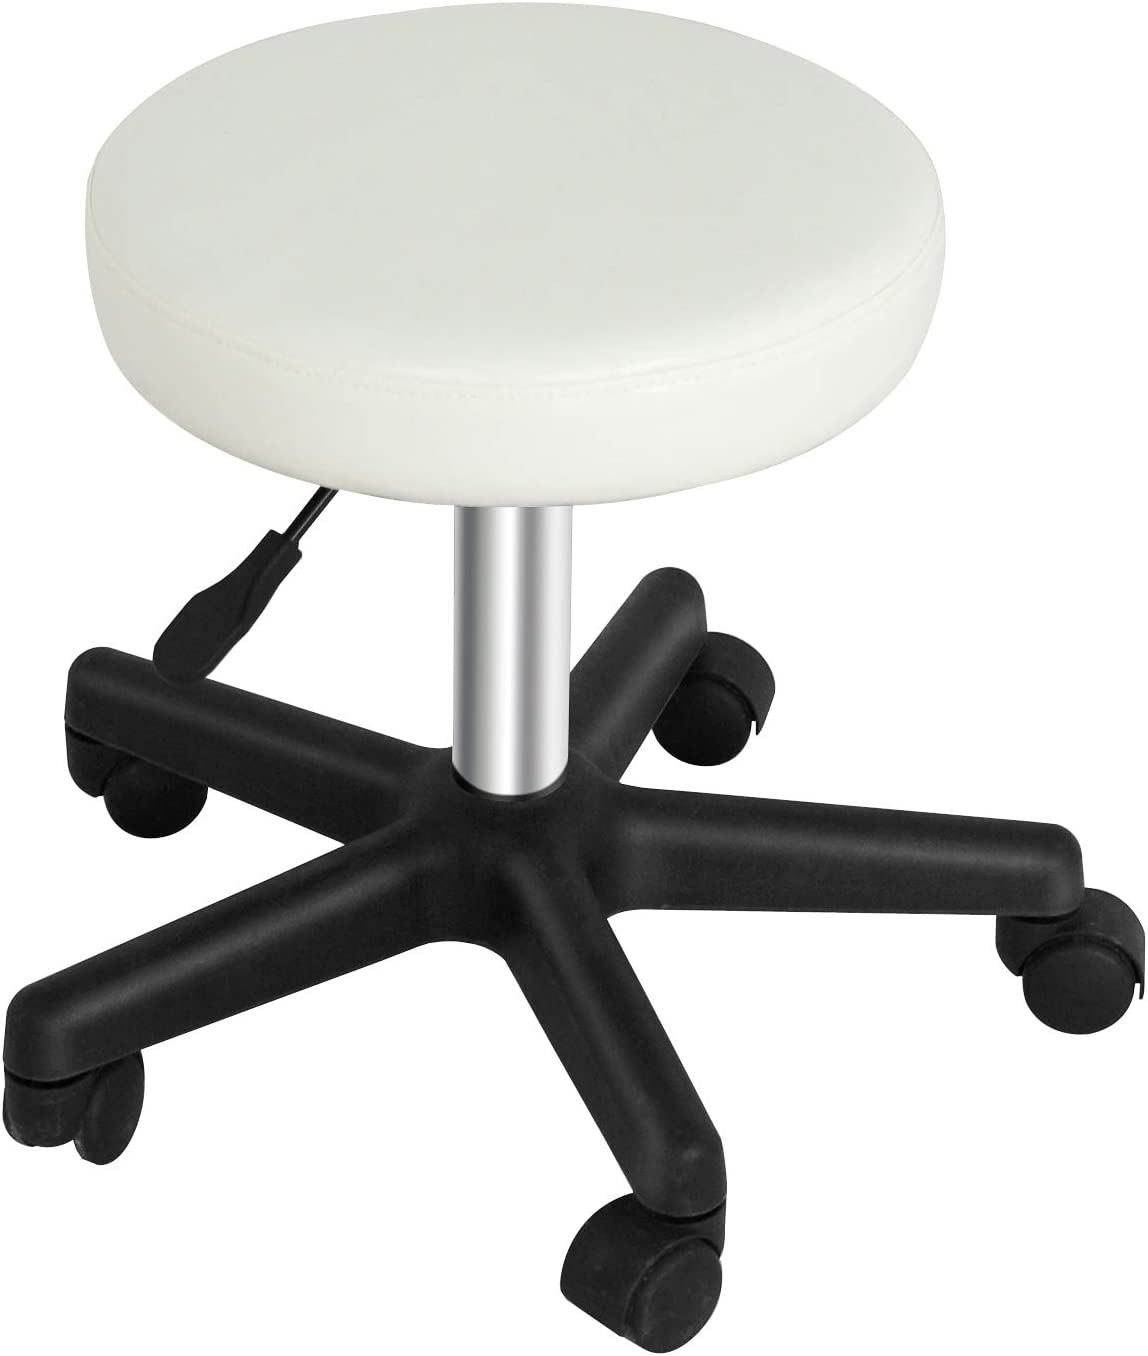 Adjustable Rolling Stool with Wheels Swivel Stool Chair Hydraulic Stool Office Stool for Beauty Salon Massage Spa Medical Tattoo Drafting, White